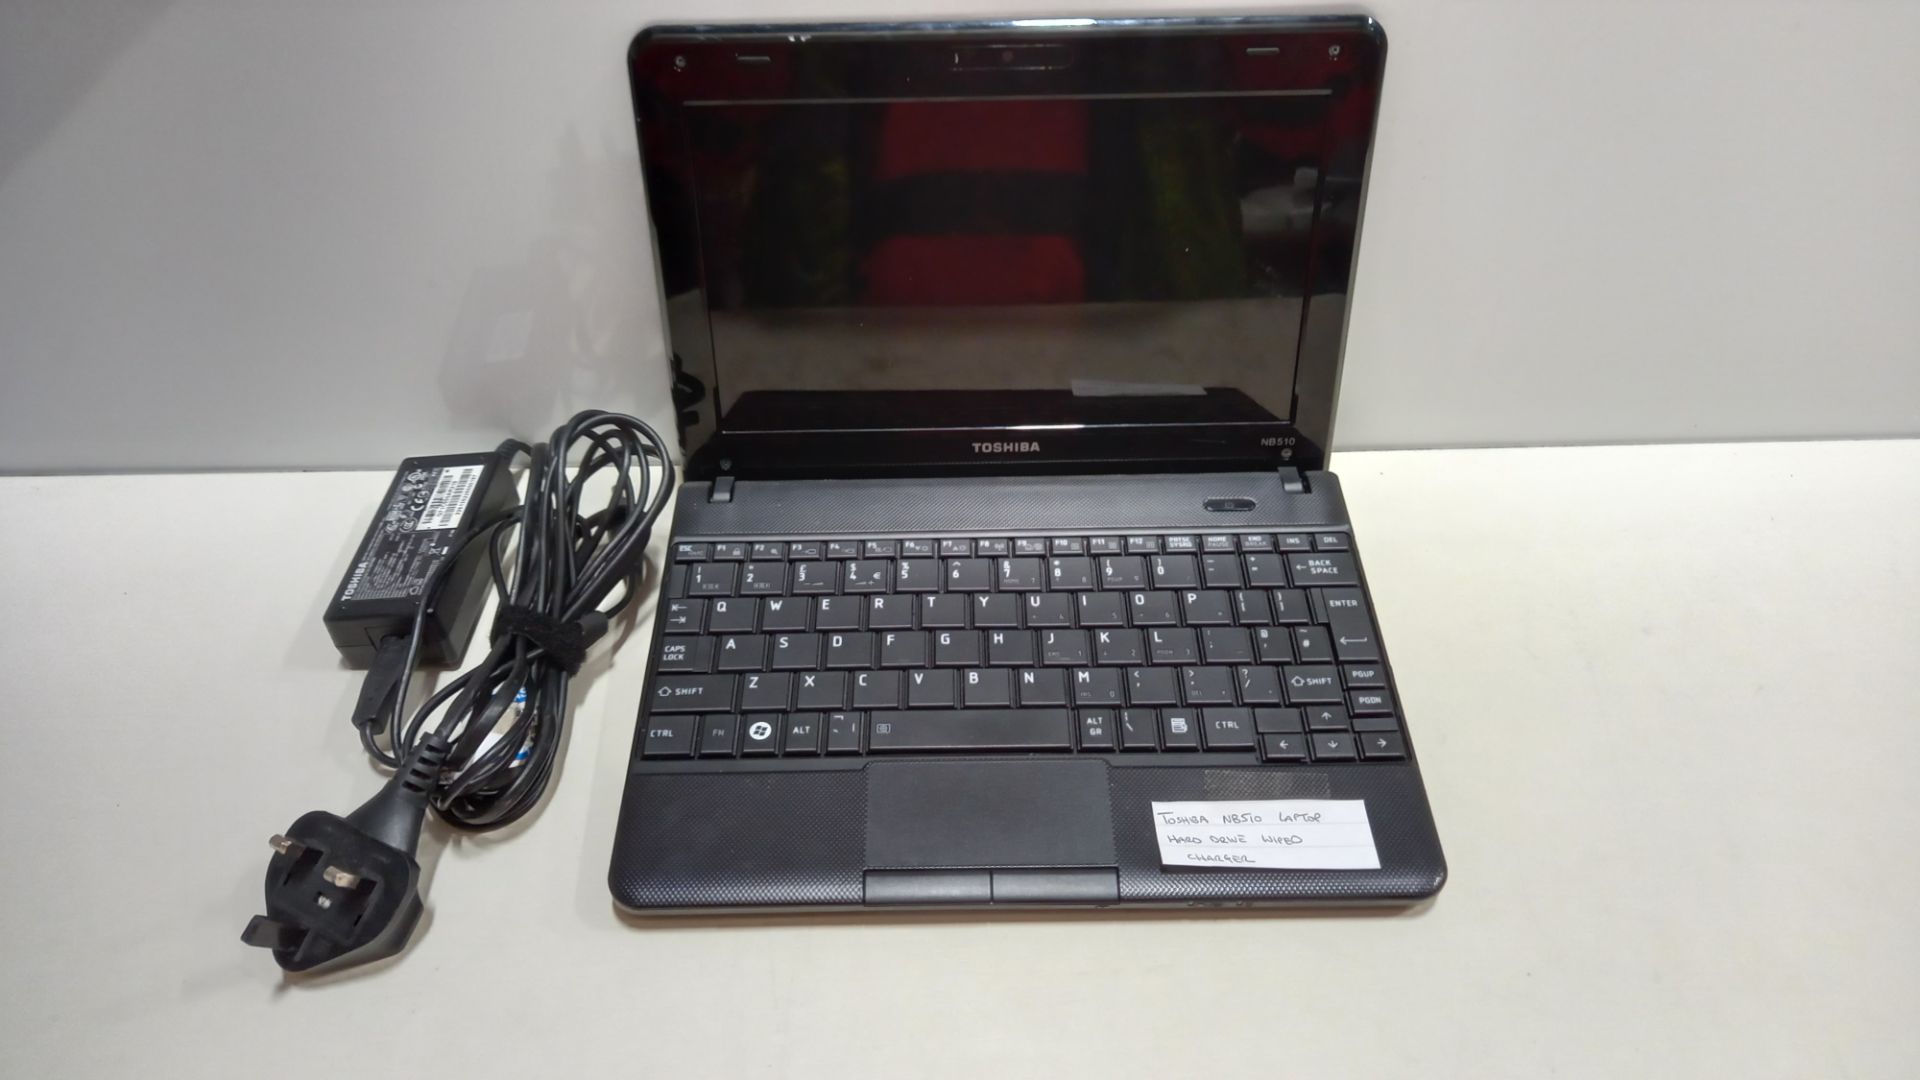 TOSHIBA NB510 LAPTOP HARD DRIIVE WIPED - WITH CHARGER